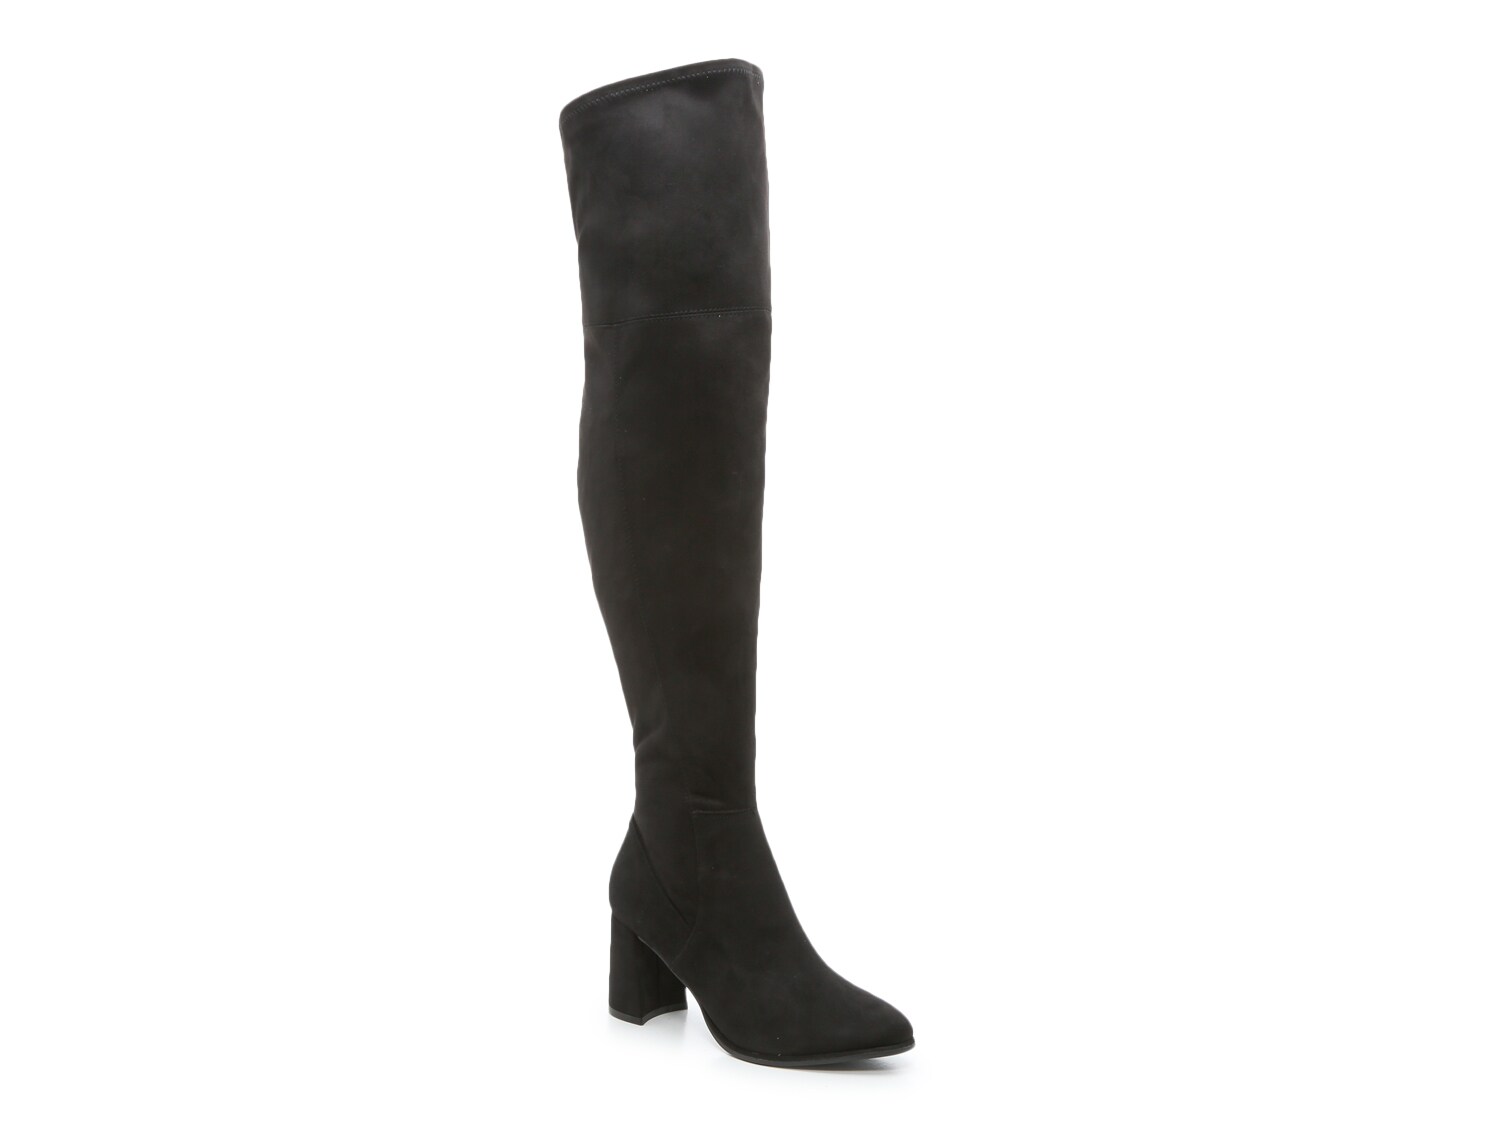 wide shaft over the knee boots